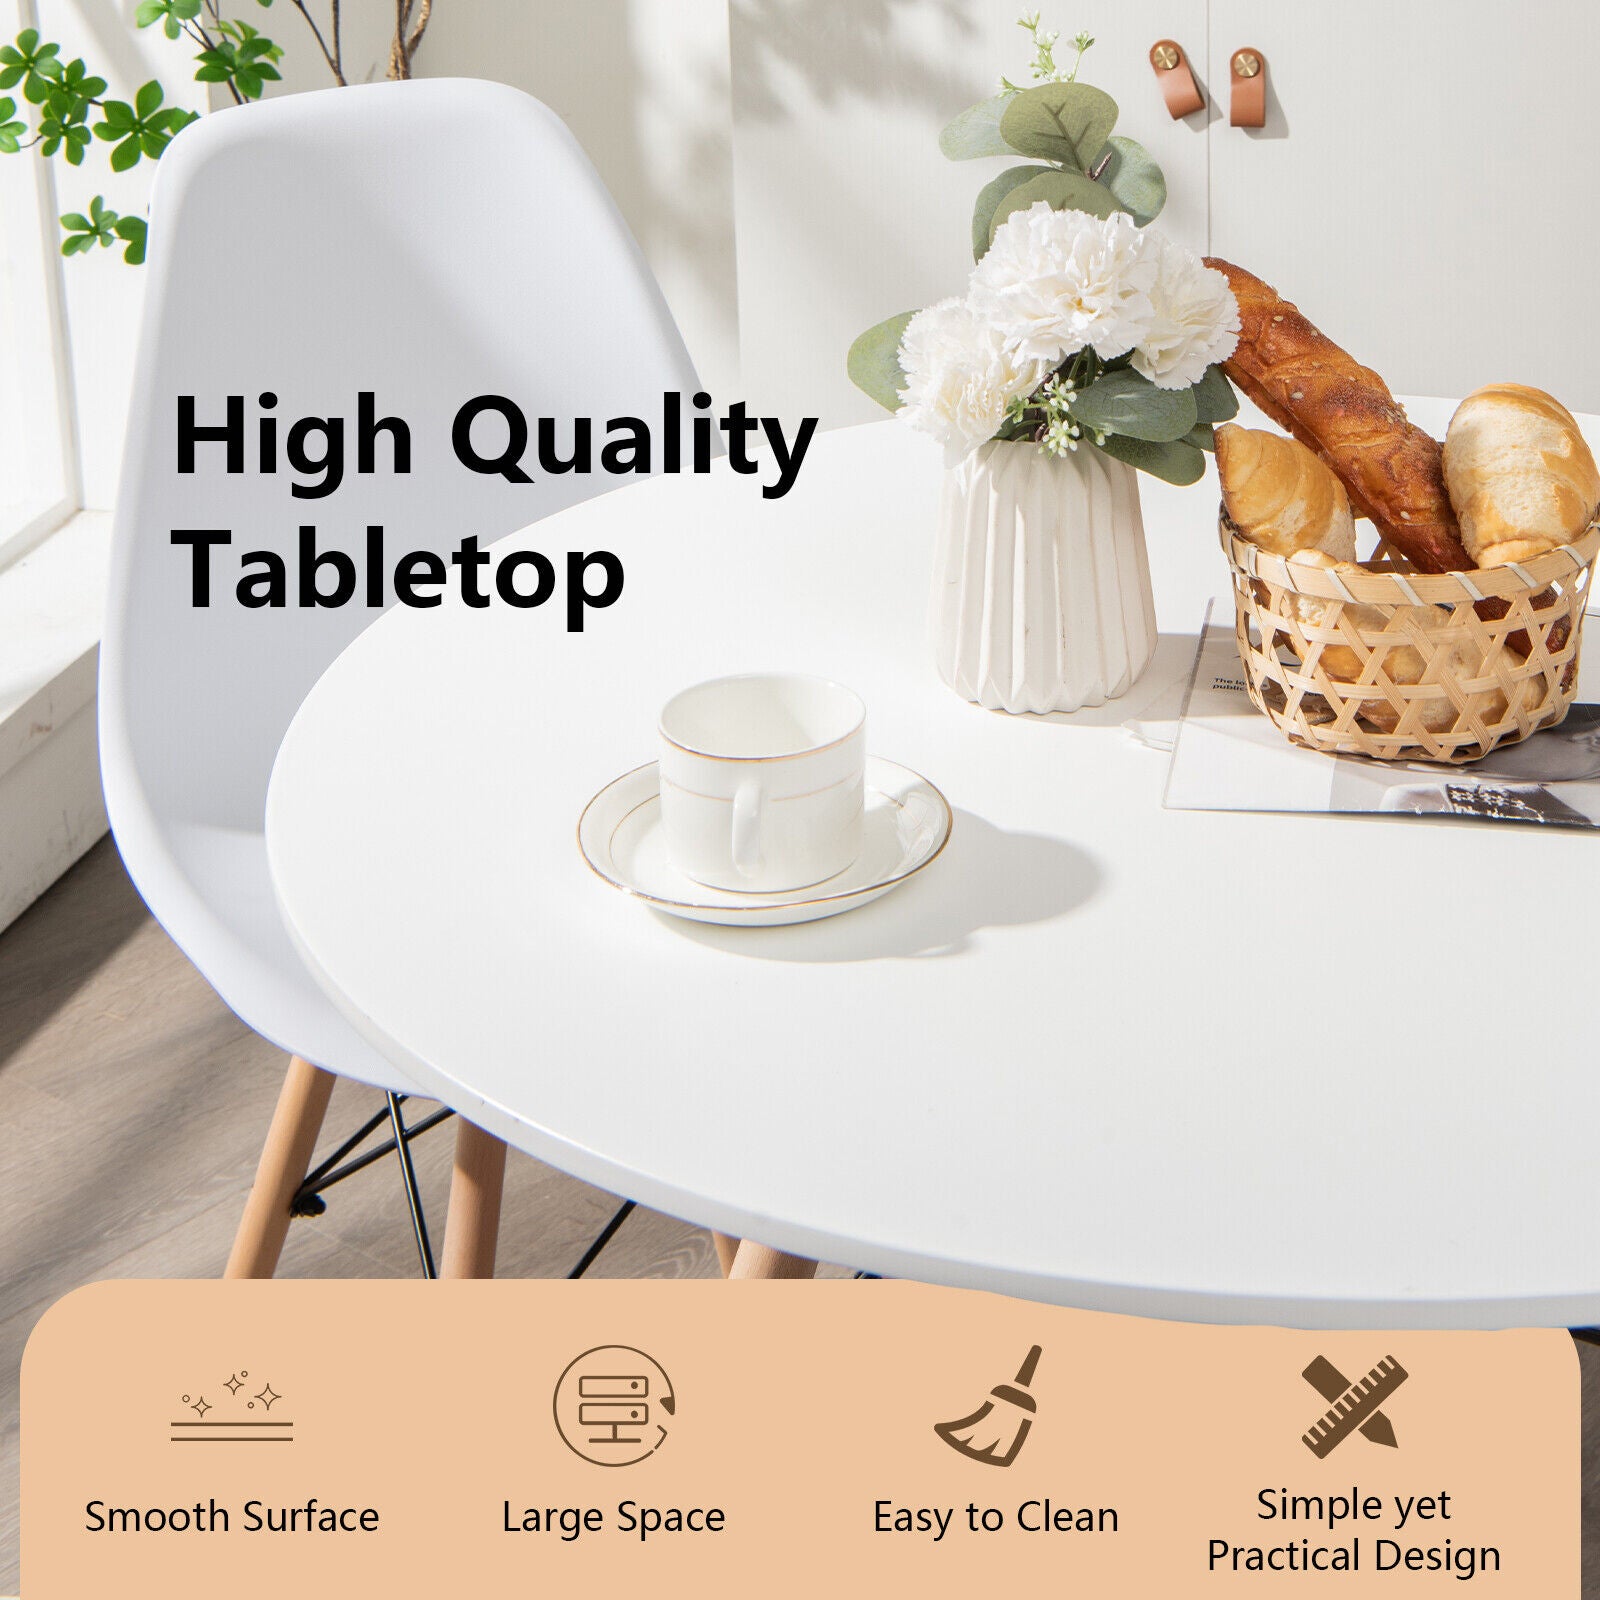 Modern and Stylish: The combination of a white tabletop and natural wood legs gives this kitchen table a seamless blend with any home decor, ranging from rustic to contemporary styles. Its sleek lines create a simple and modern aesthetic, making it an ideal addition to dining rooms, kitchens, or living rooms.